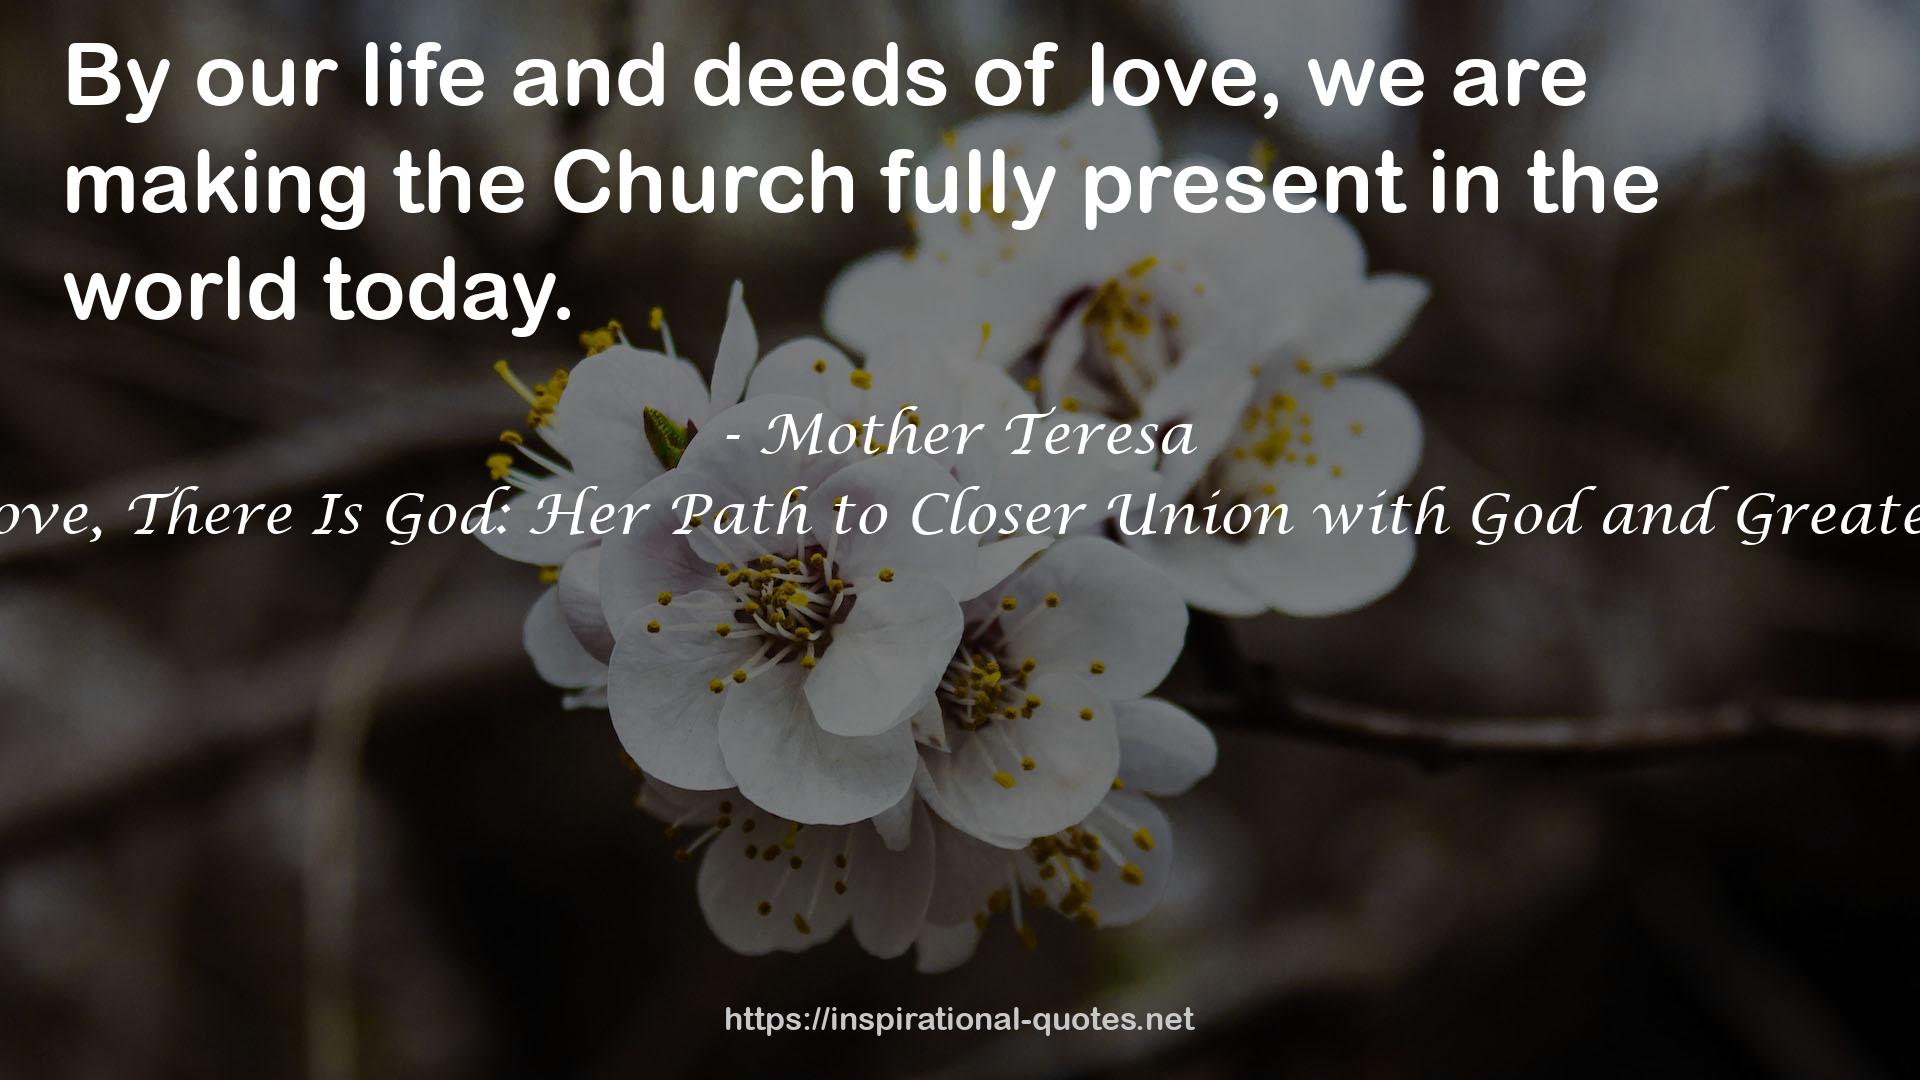 Where There Is Love, There Is God: Her Path to Closer Union with God and Greater Love for Others QUOTES